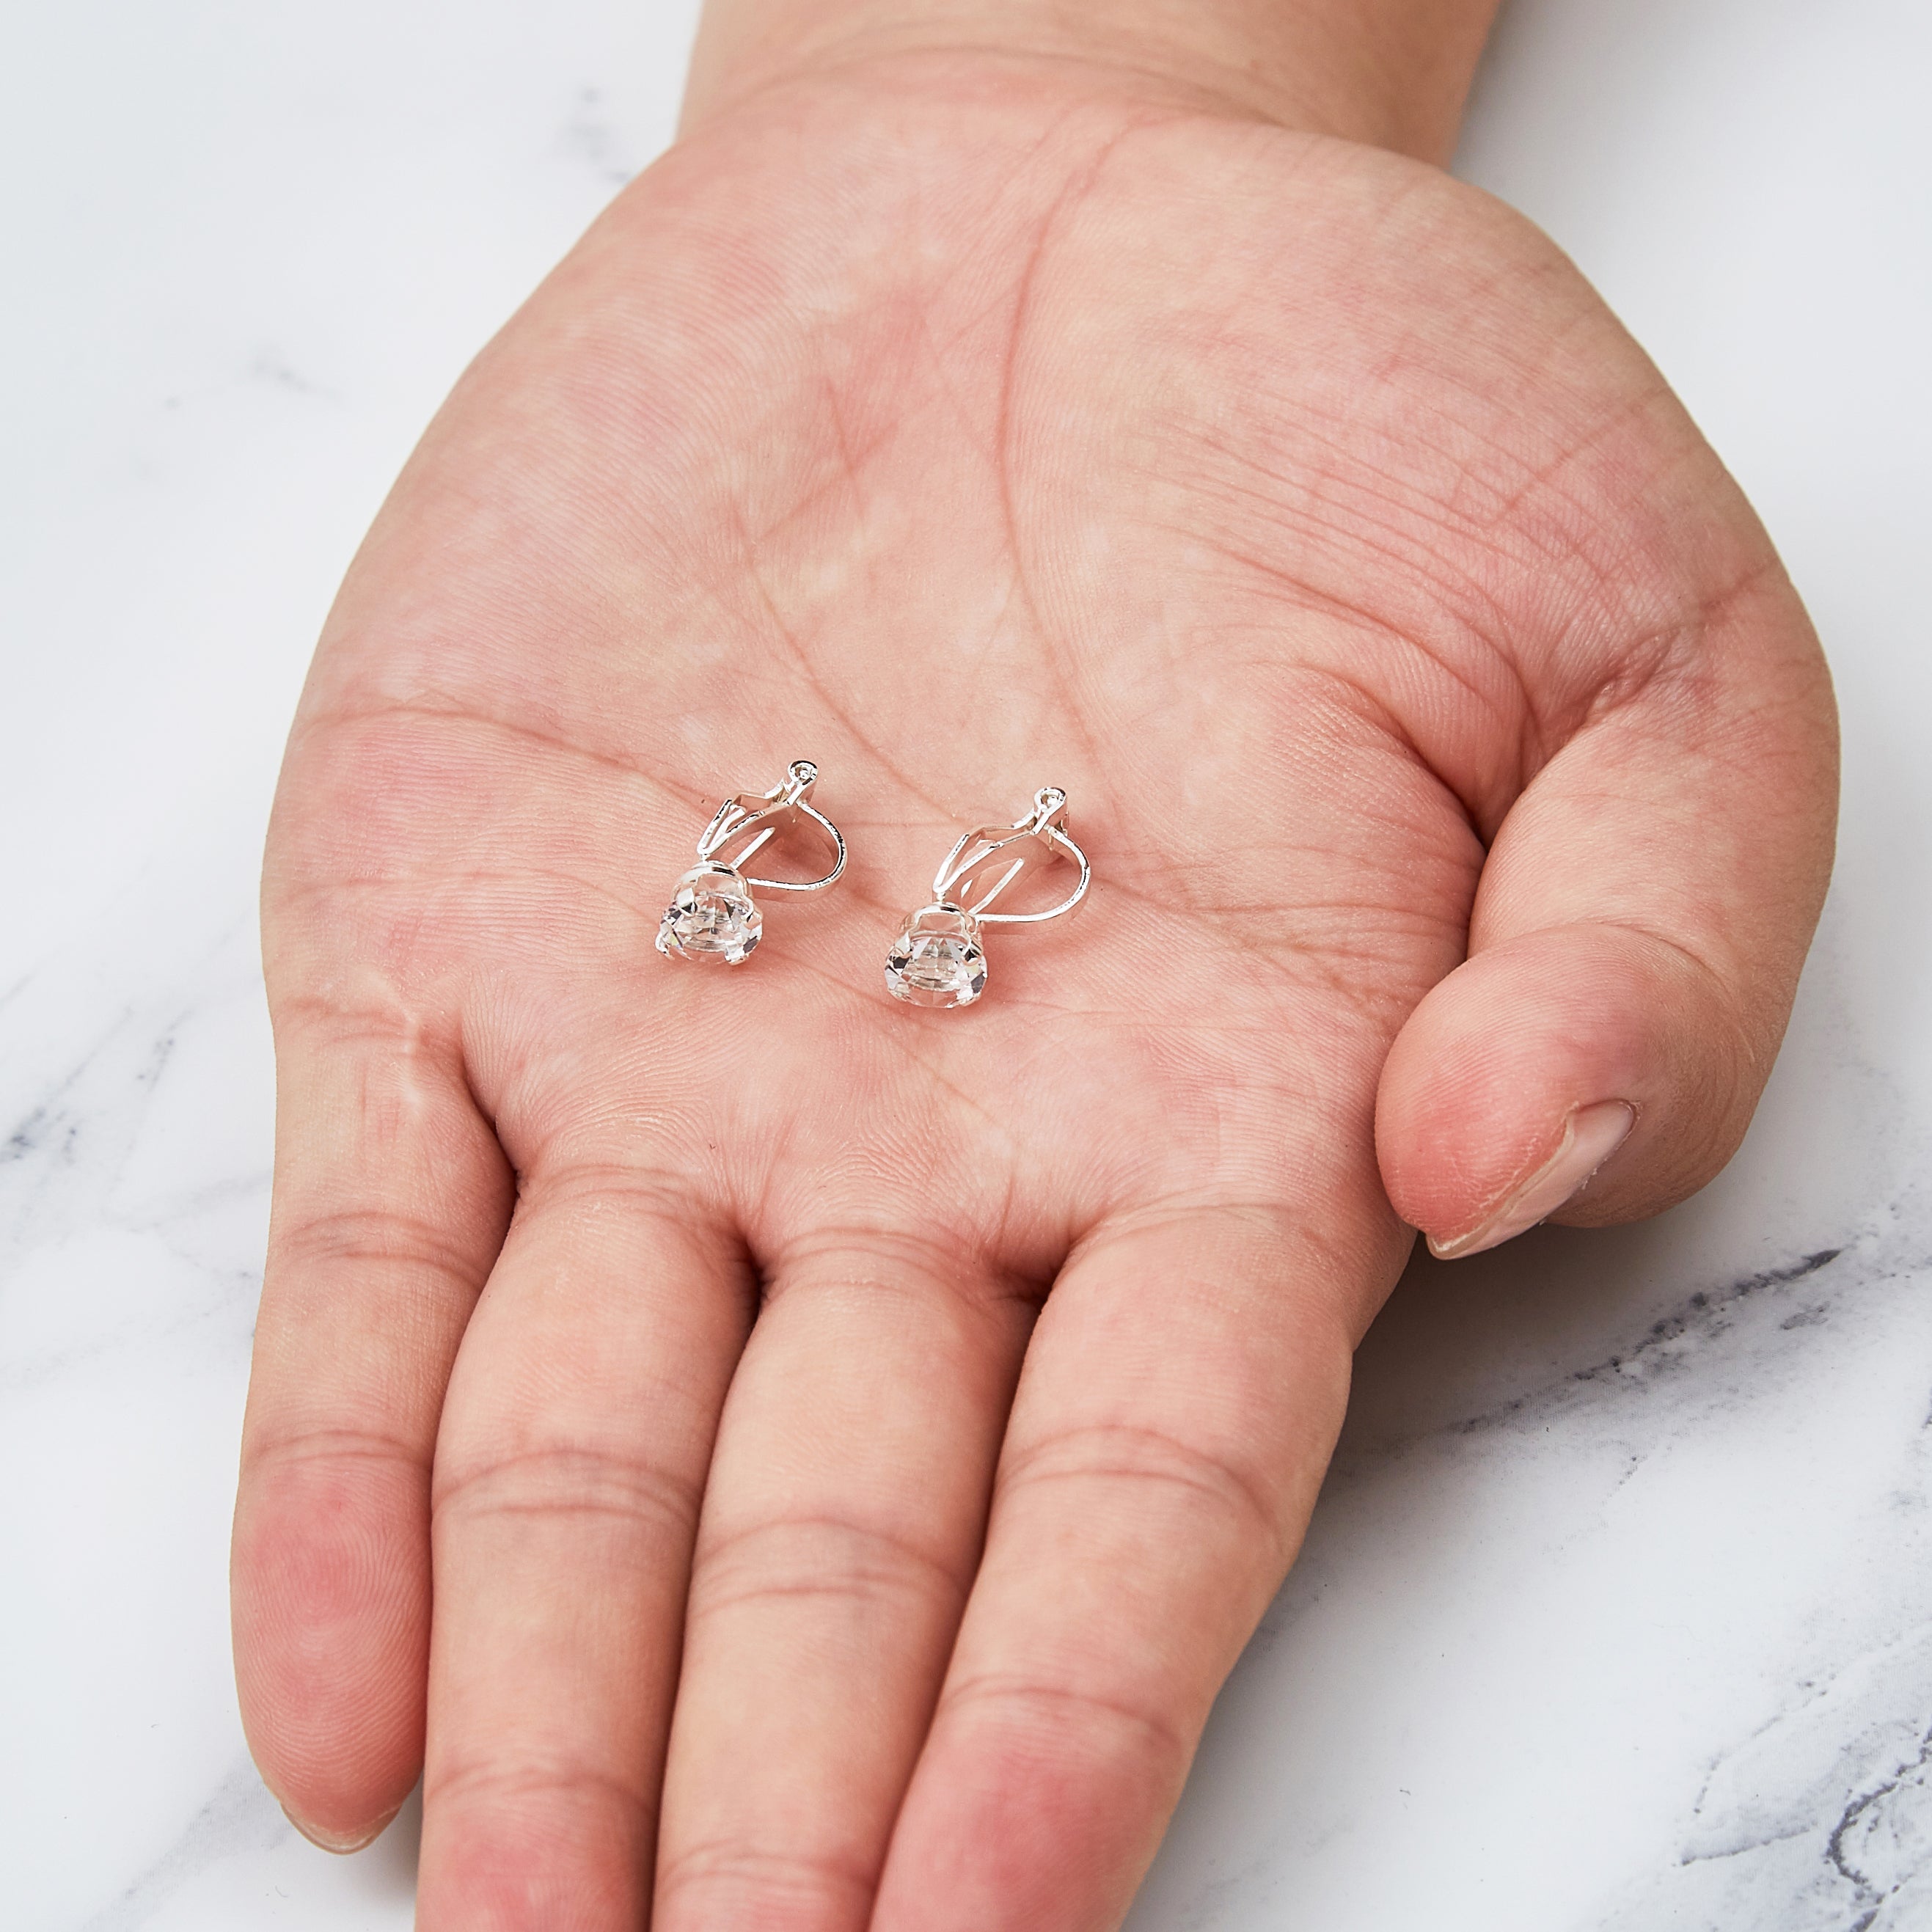 April (Diamond) Birthstone Clip On Earrings Created with Zircondia® Crystals